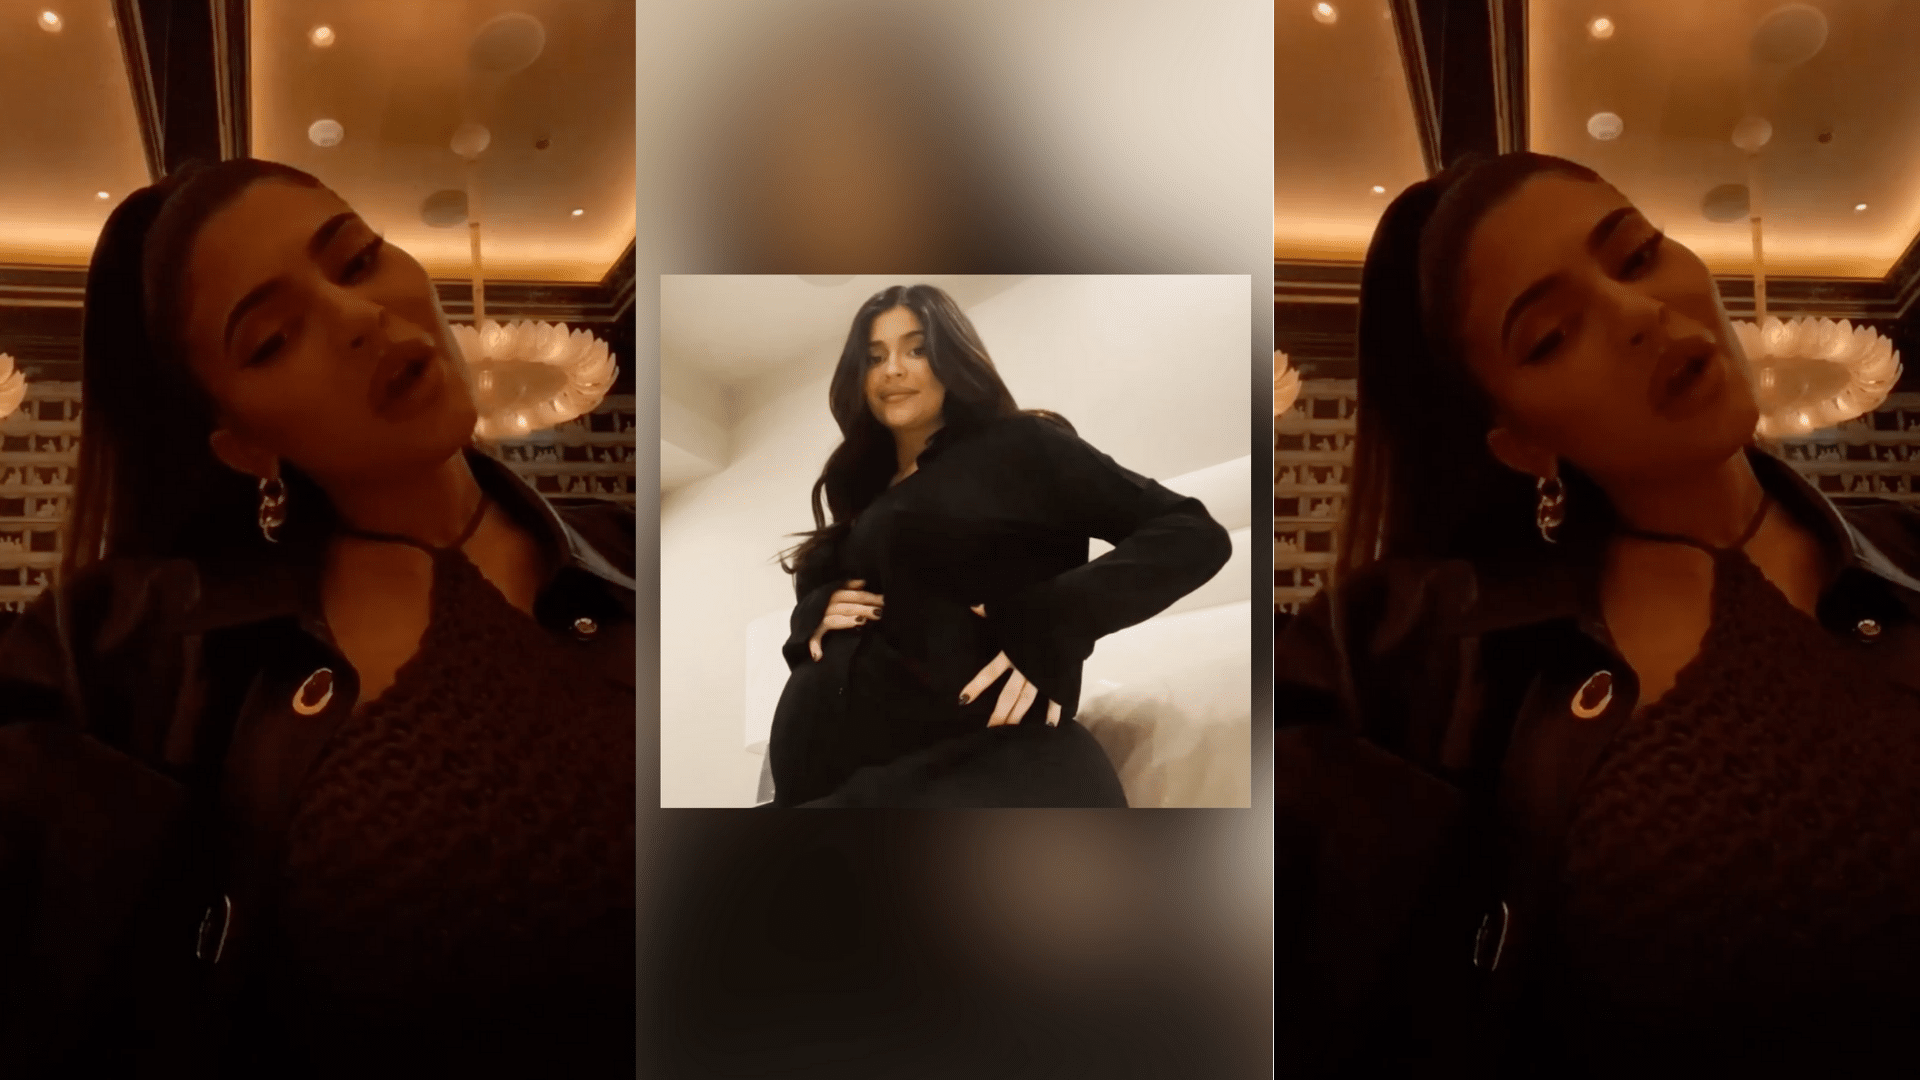 The Can't Get Enough of Kylie Jenner's New Pregnancy Video